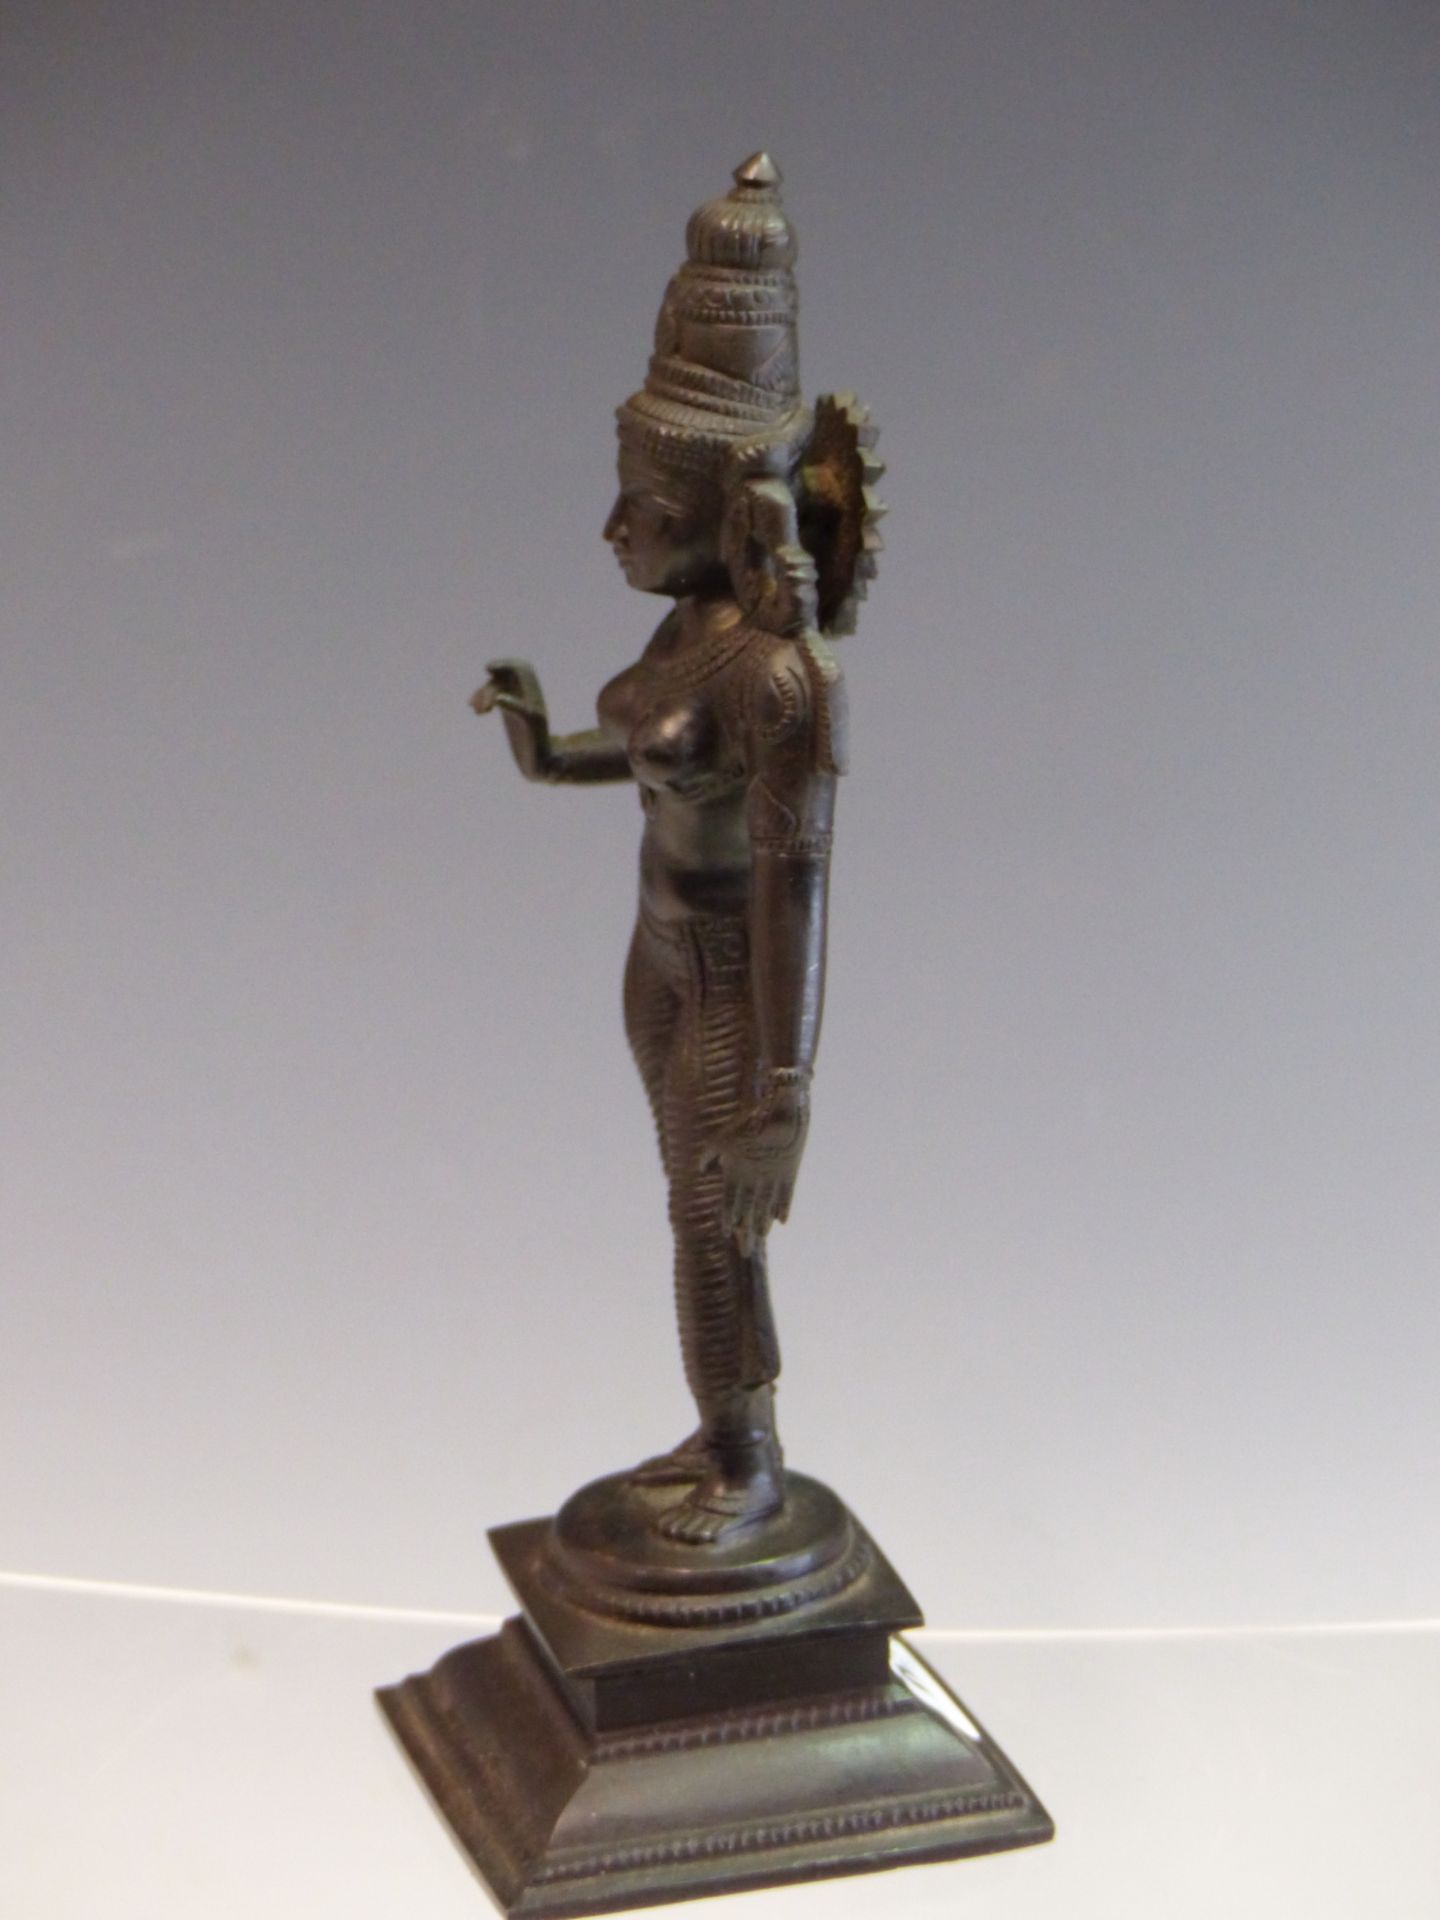 A CAST BRONZE FIGURE OF THE GODESS PARVATI. 20th CENTURY. 20 Cm HIGH. - Image 2 of 2